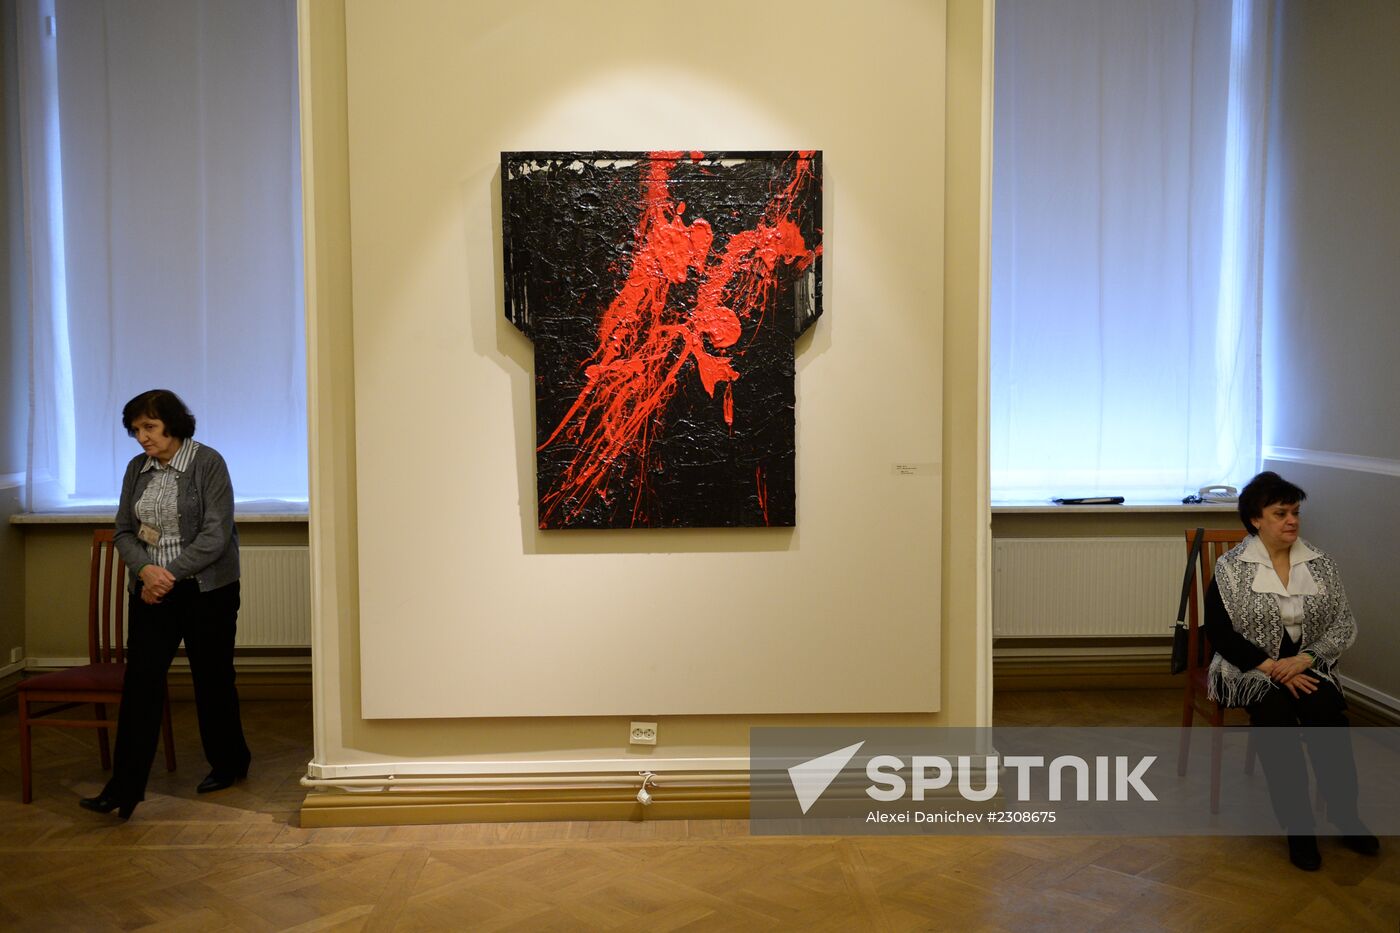 Sylvester Stallone's art exhibition opens at Russian Museum